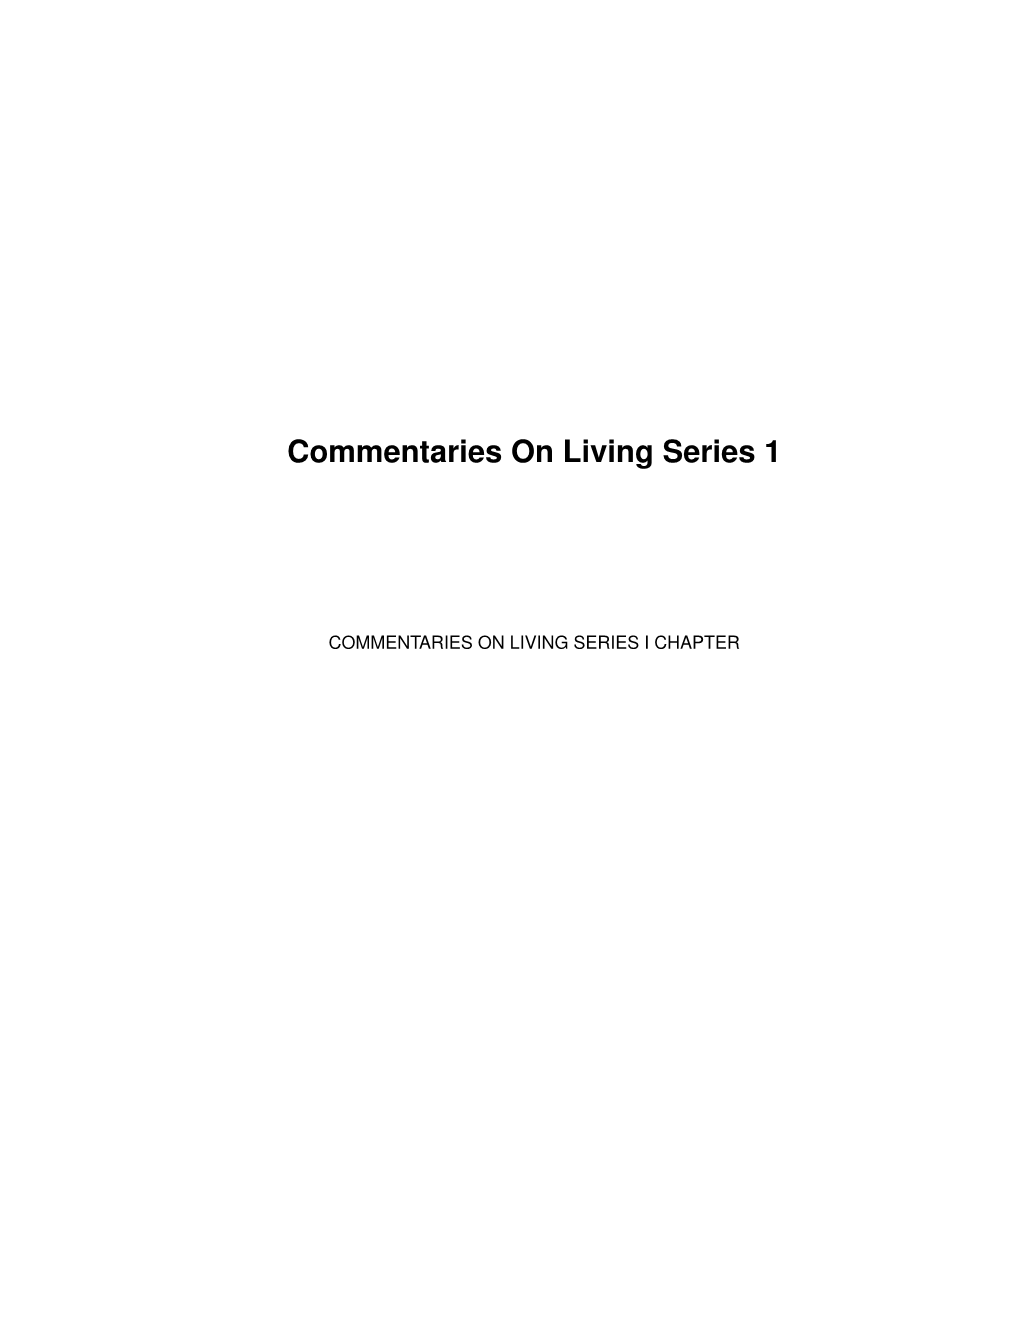 Commentaries on Living Series 1